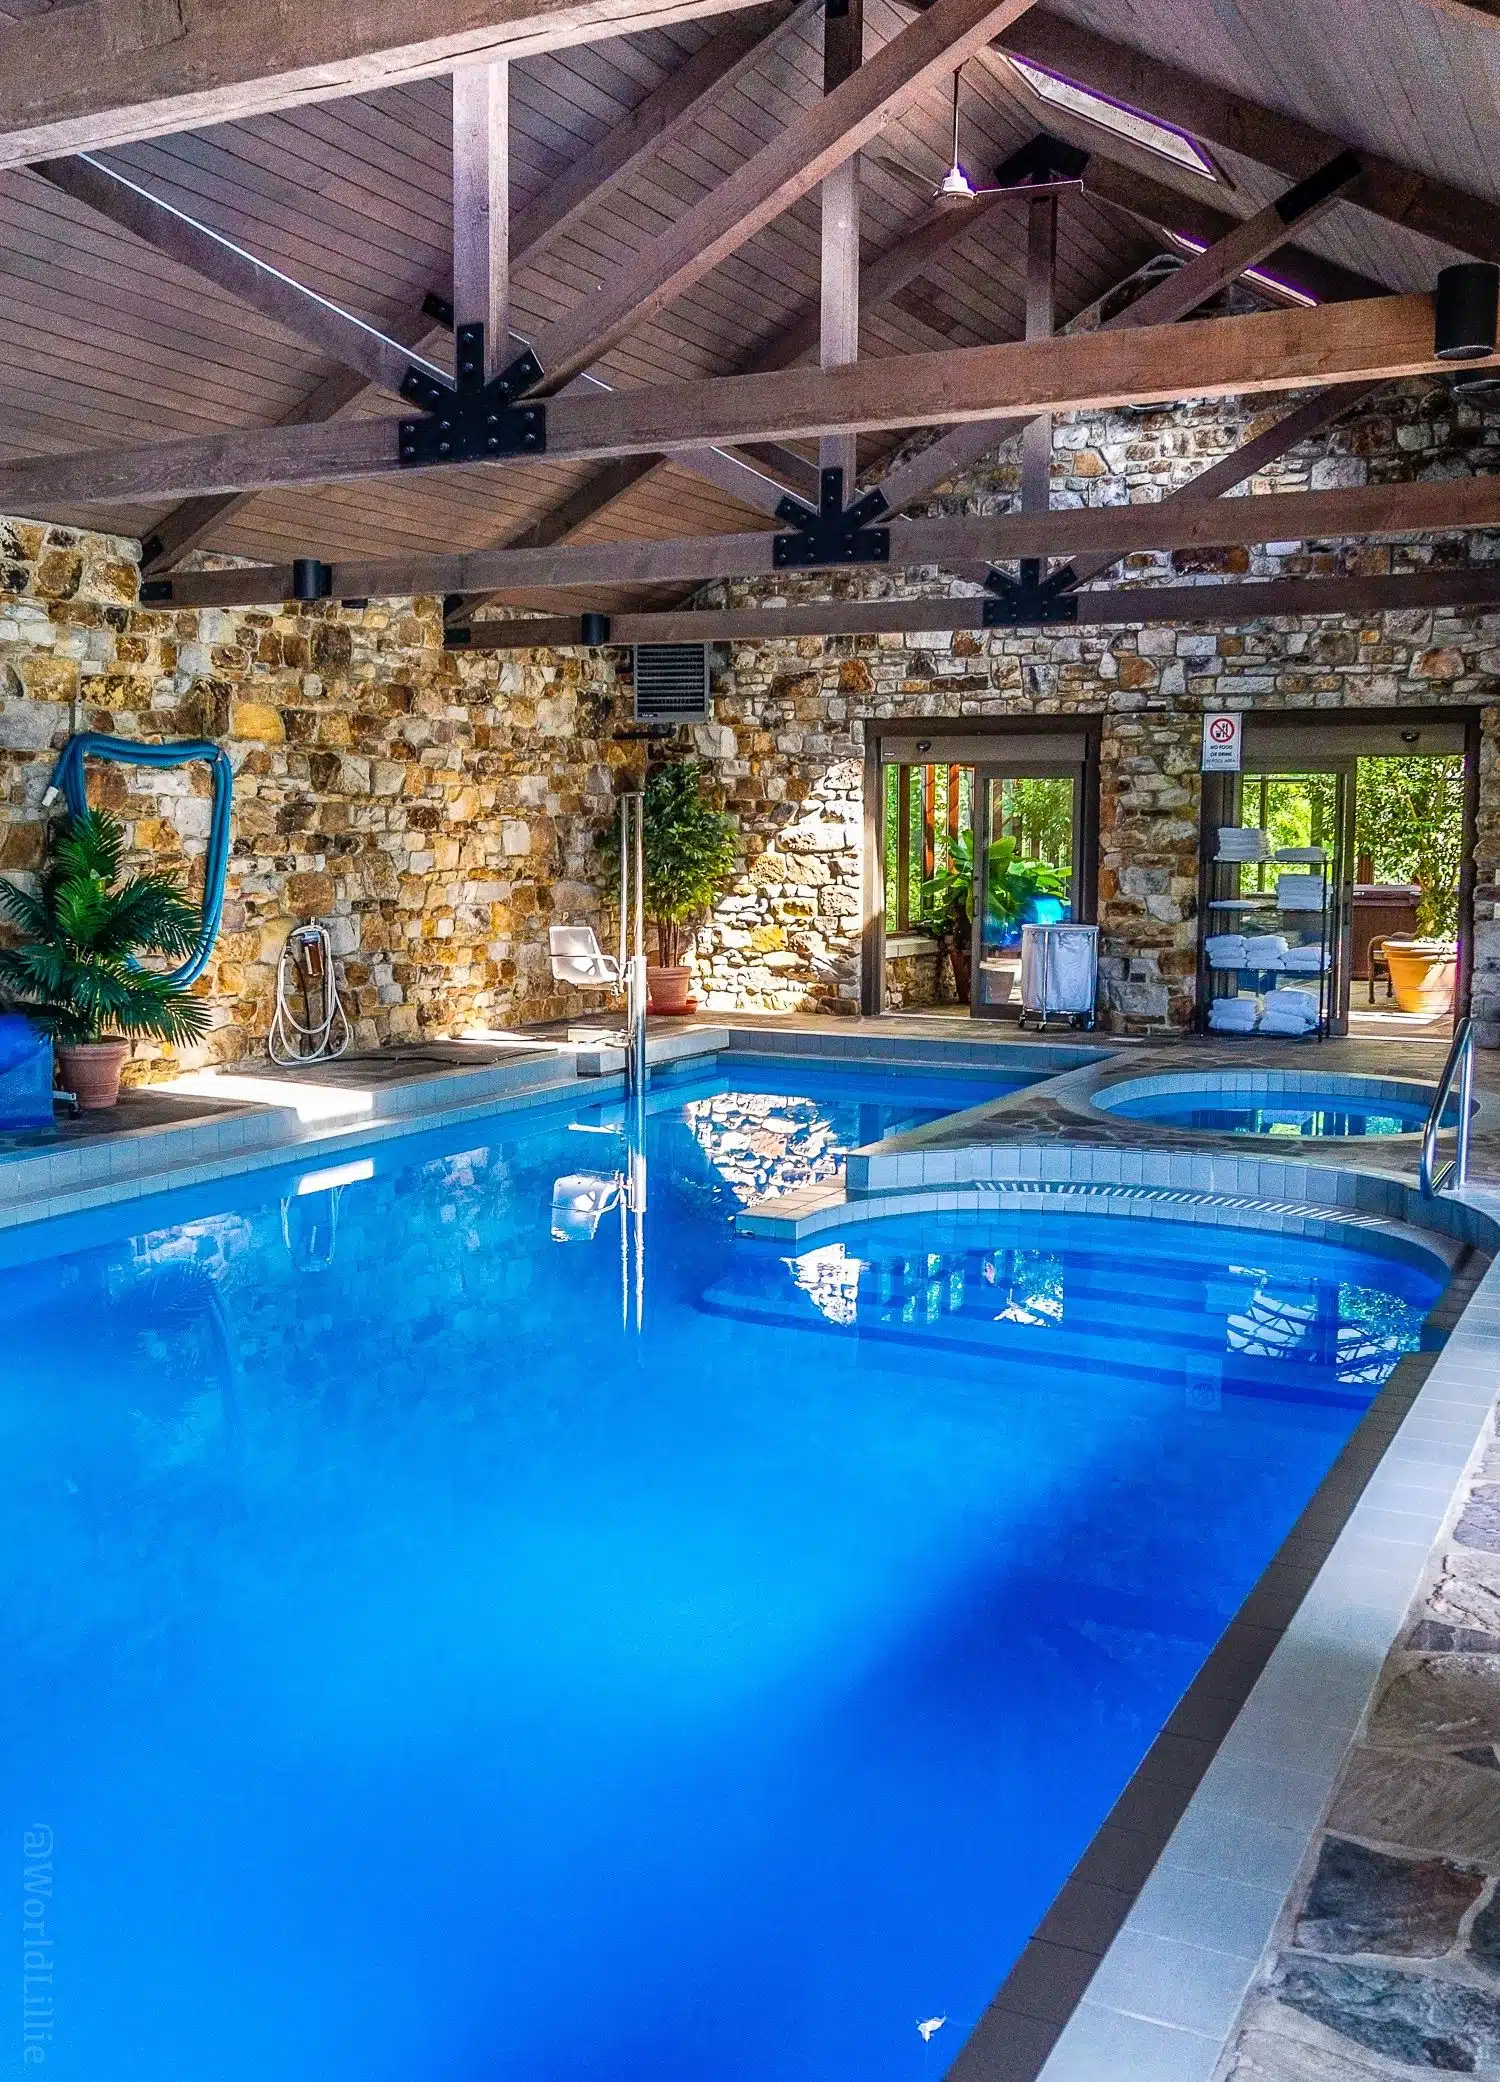 The pool is accessible to people in wheelchairs! Where to stay near Fallingwater in the Laurel Highlands, PA? Oak Lodge is a great hotel and B&B with luxury private cabins in southwest Pennsylvania.